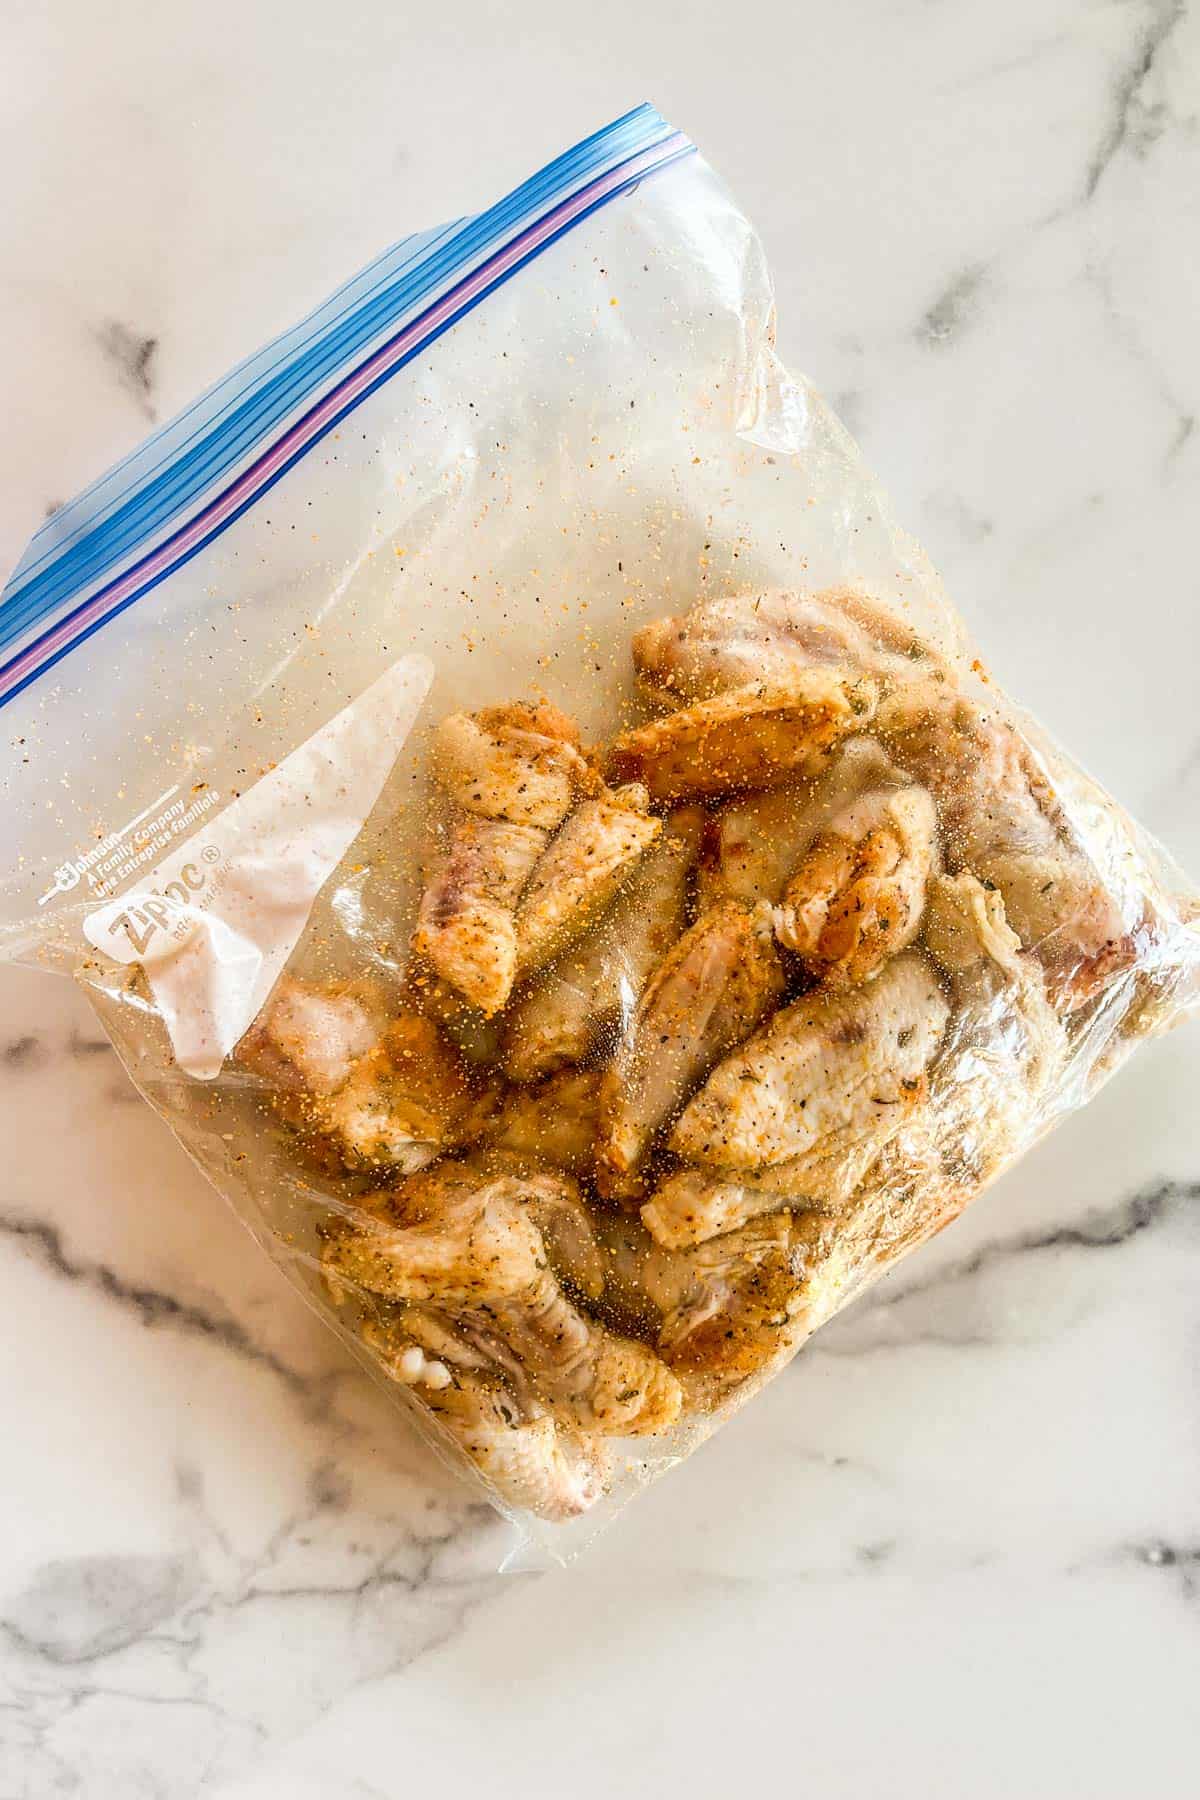 Chicken wings marinating in spices in a ziploc bag.